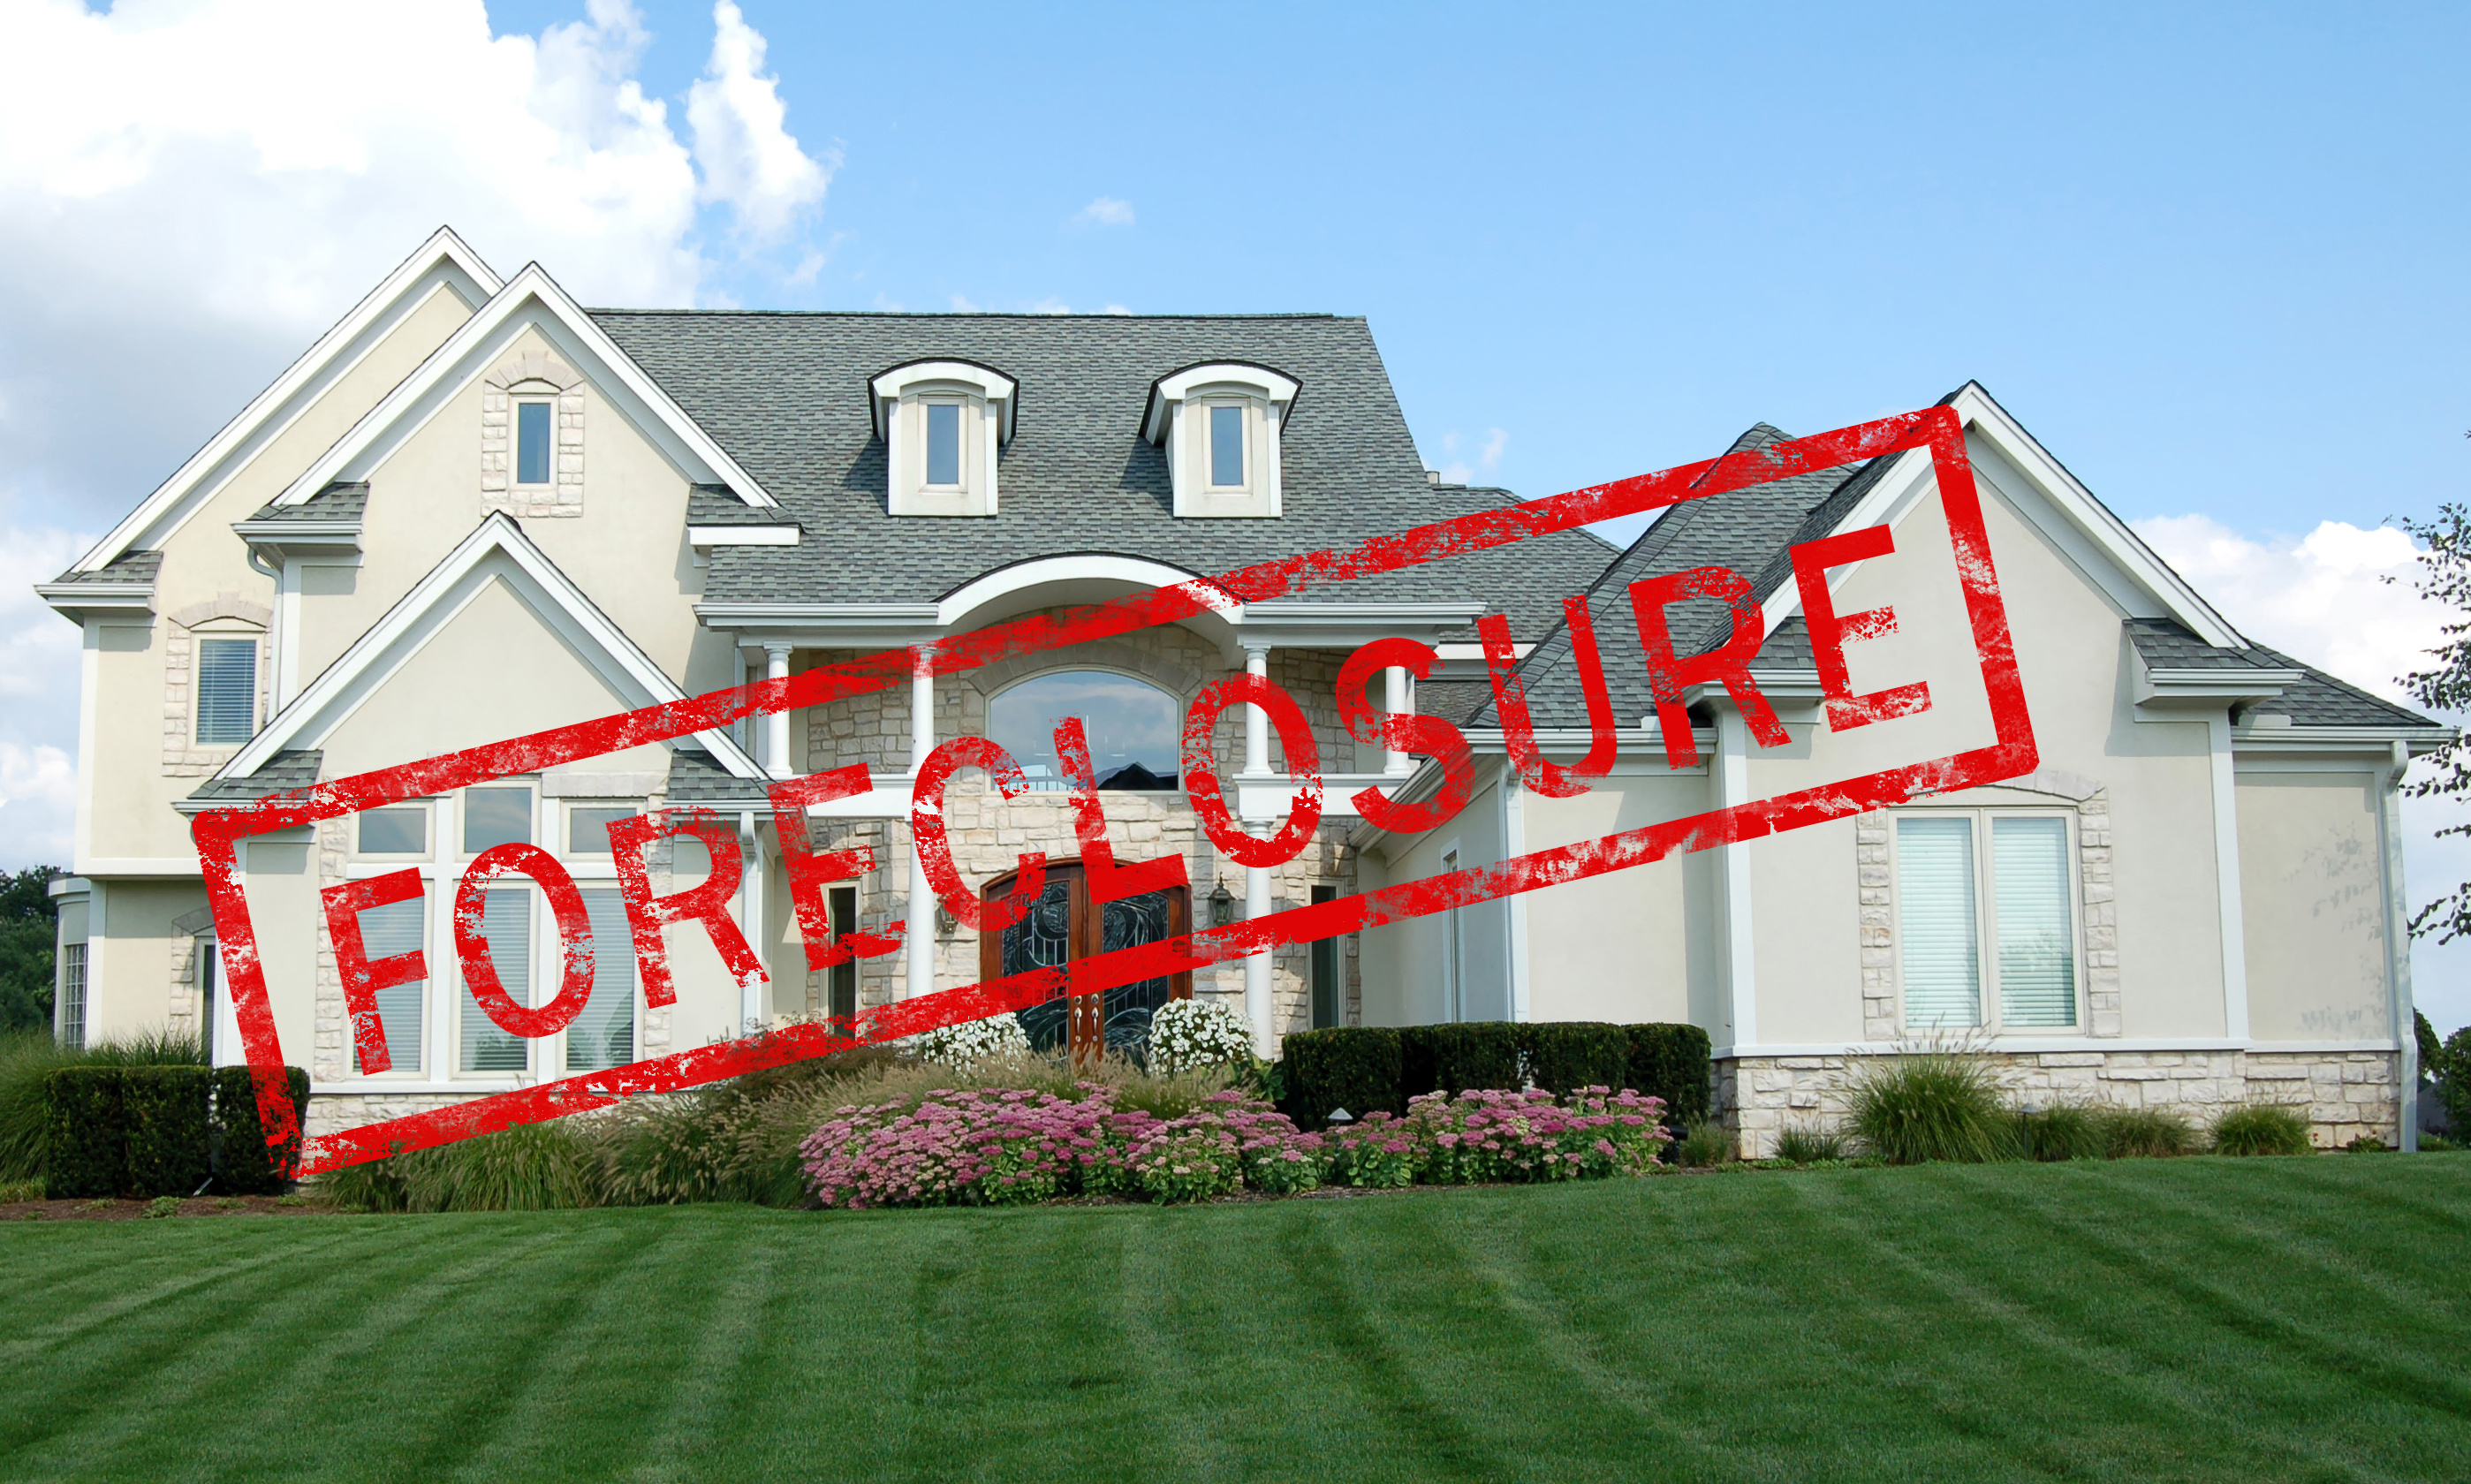 Call Double J Appraisals, LLC. to order valuations of Genesee foreclosures